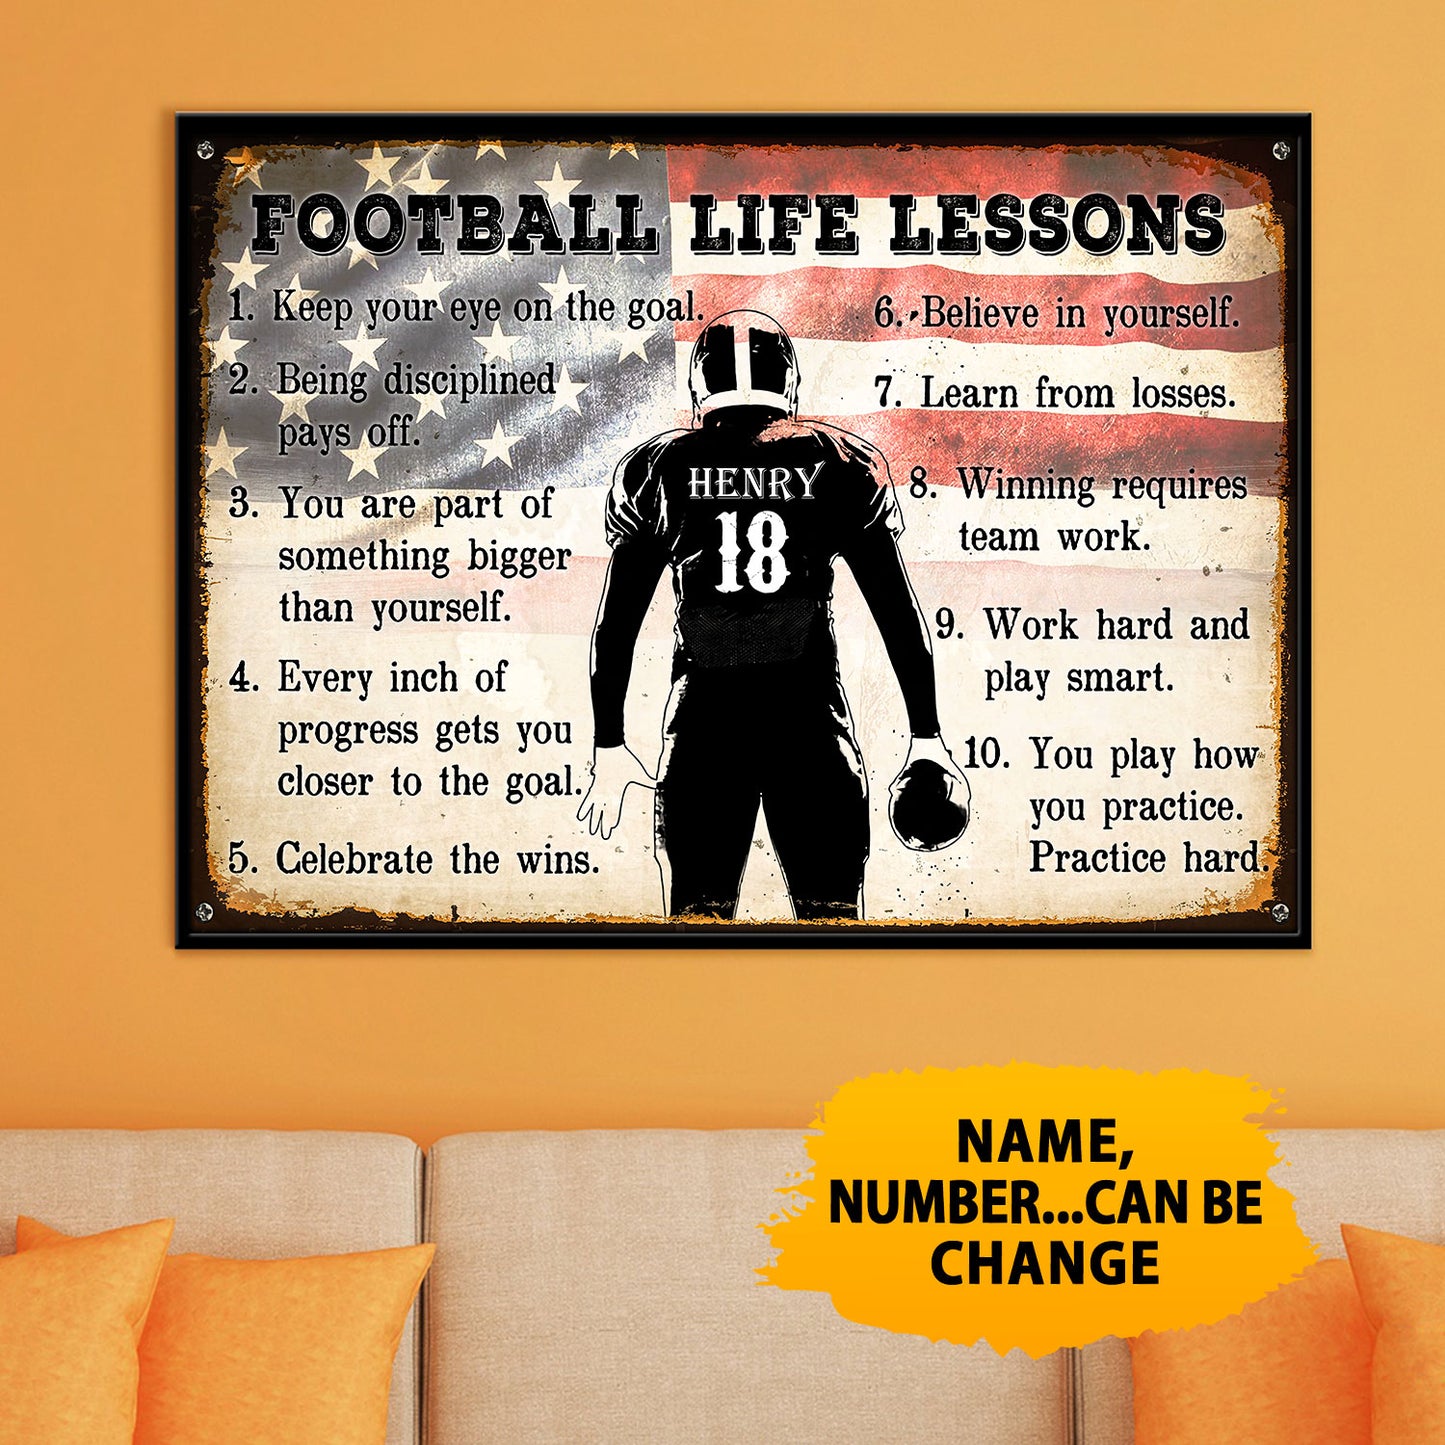 Football Life Lessons 2 - Personalizedwitch Poster  For Football Player